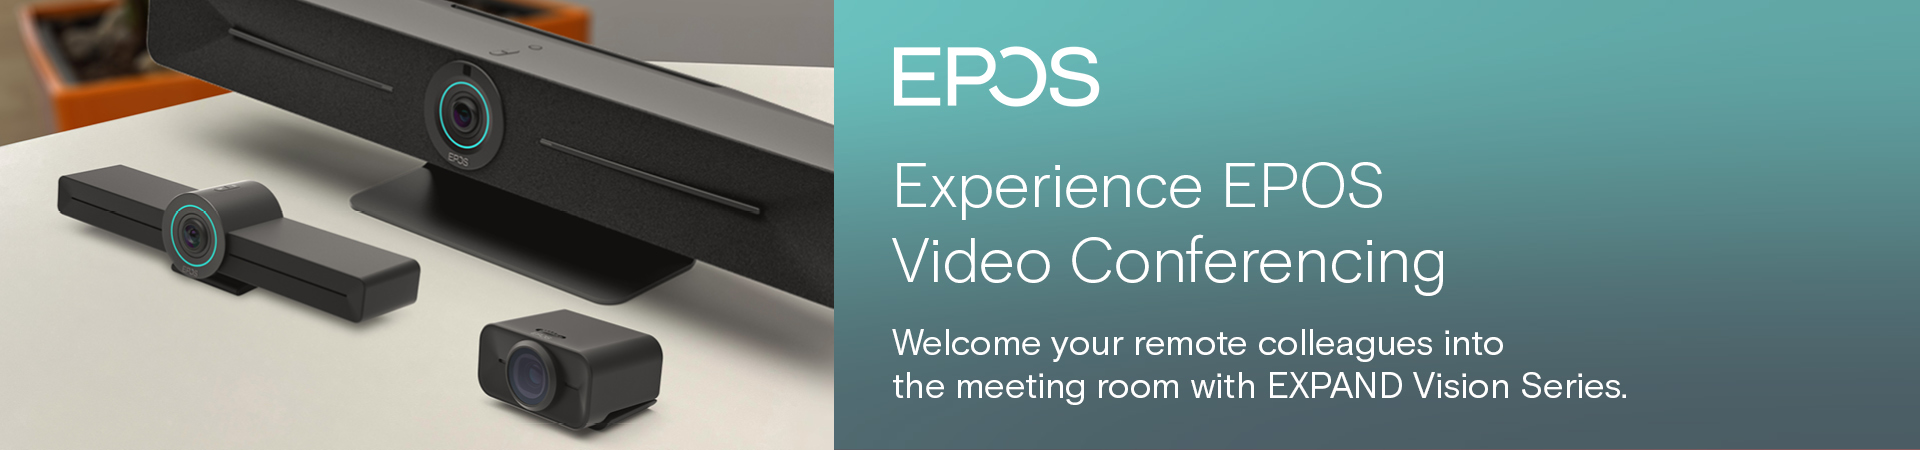 EPOS - Experience EPOS Video Conferencing - Welcome your remote colleagues into the meeting room with EXPAND Vision Series